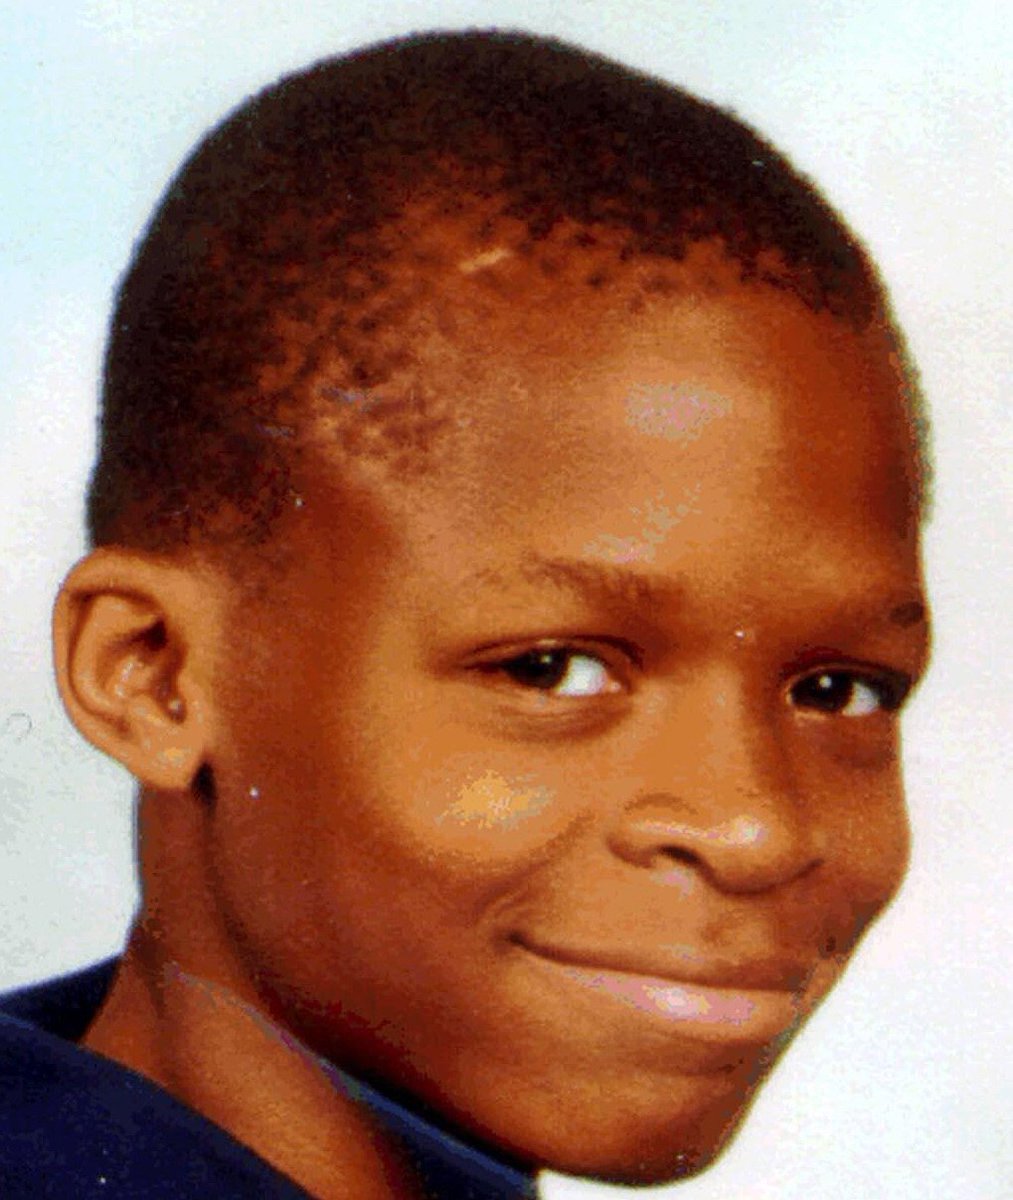 16 years ago today #damilolataylor was killed. Our thoughts are with his family and friends ❤🌷